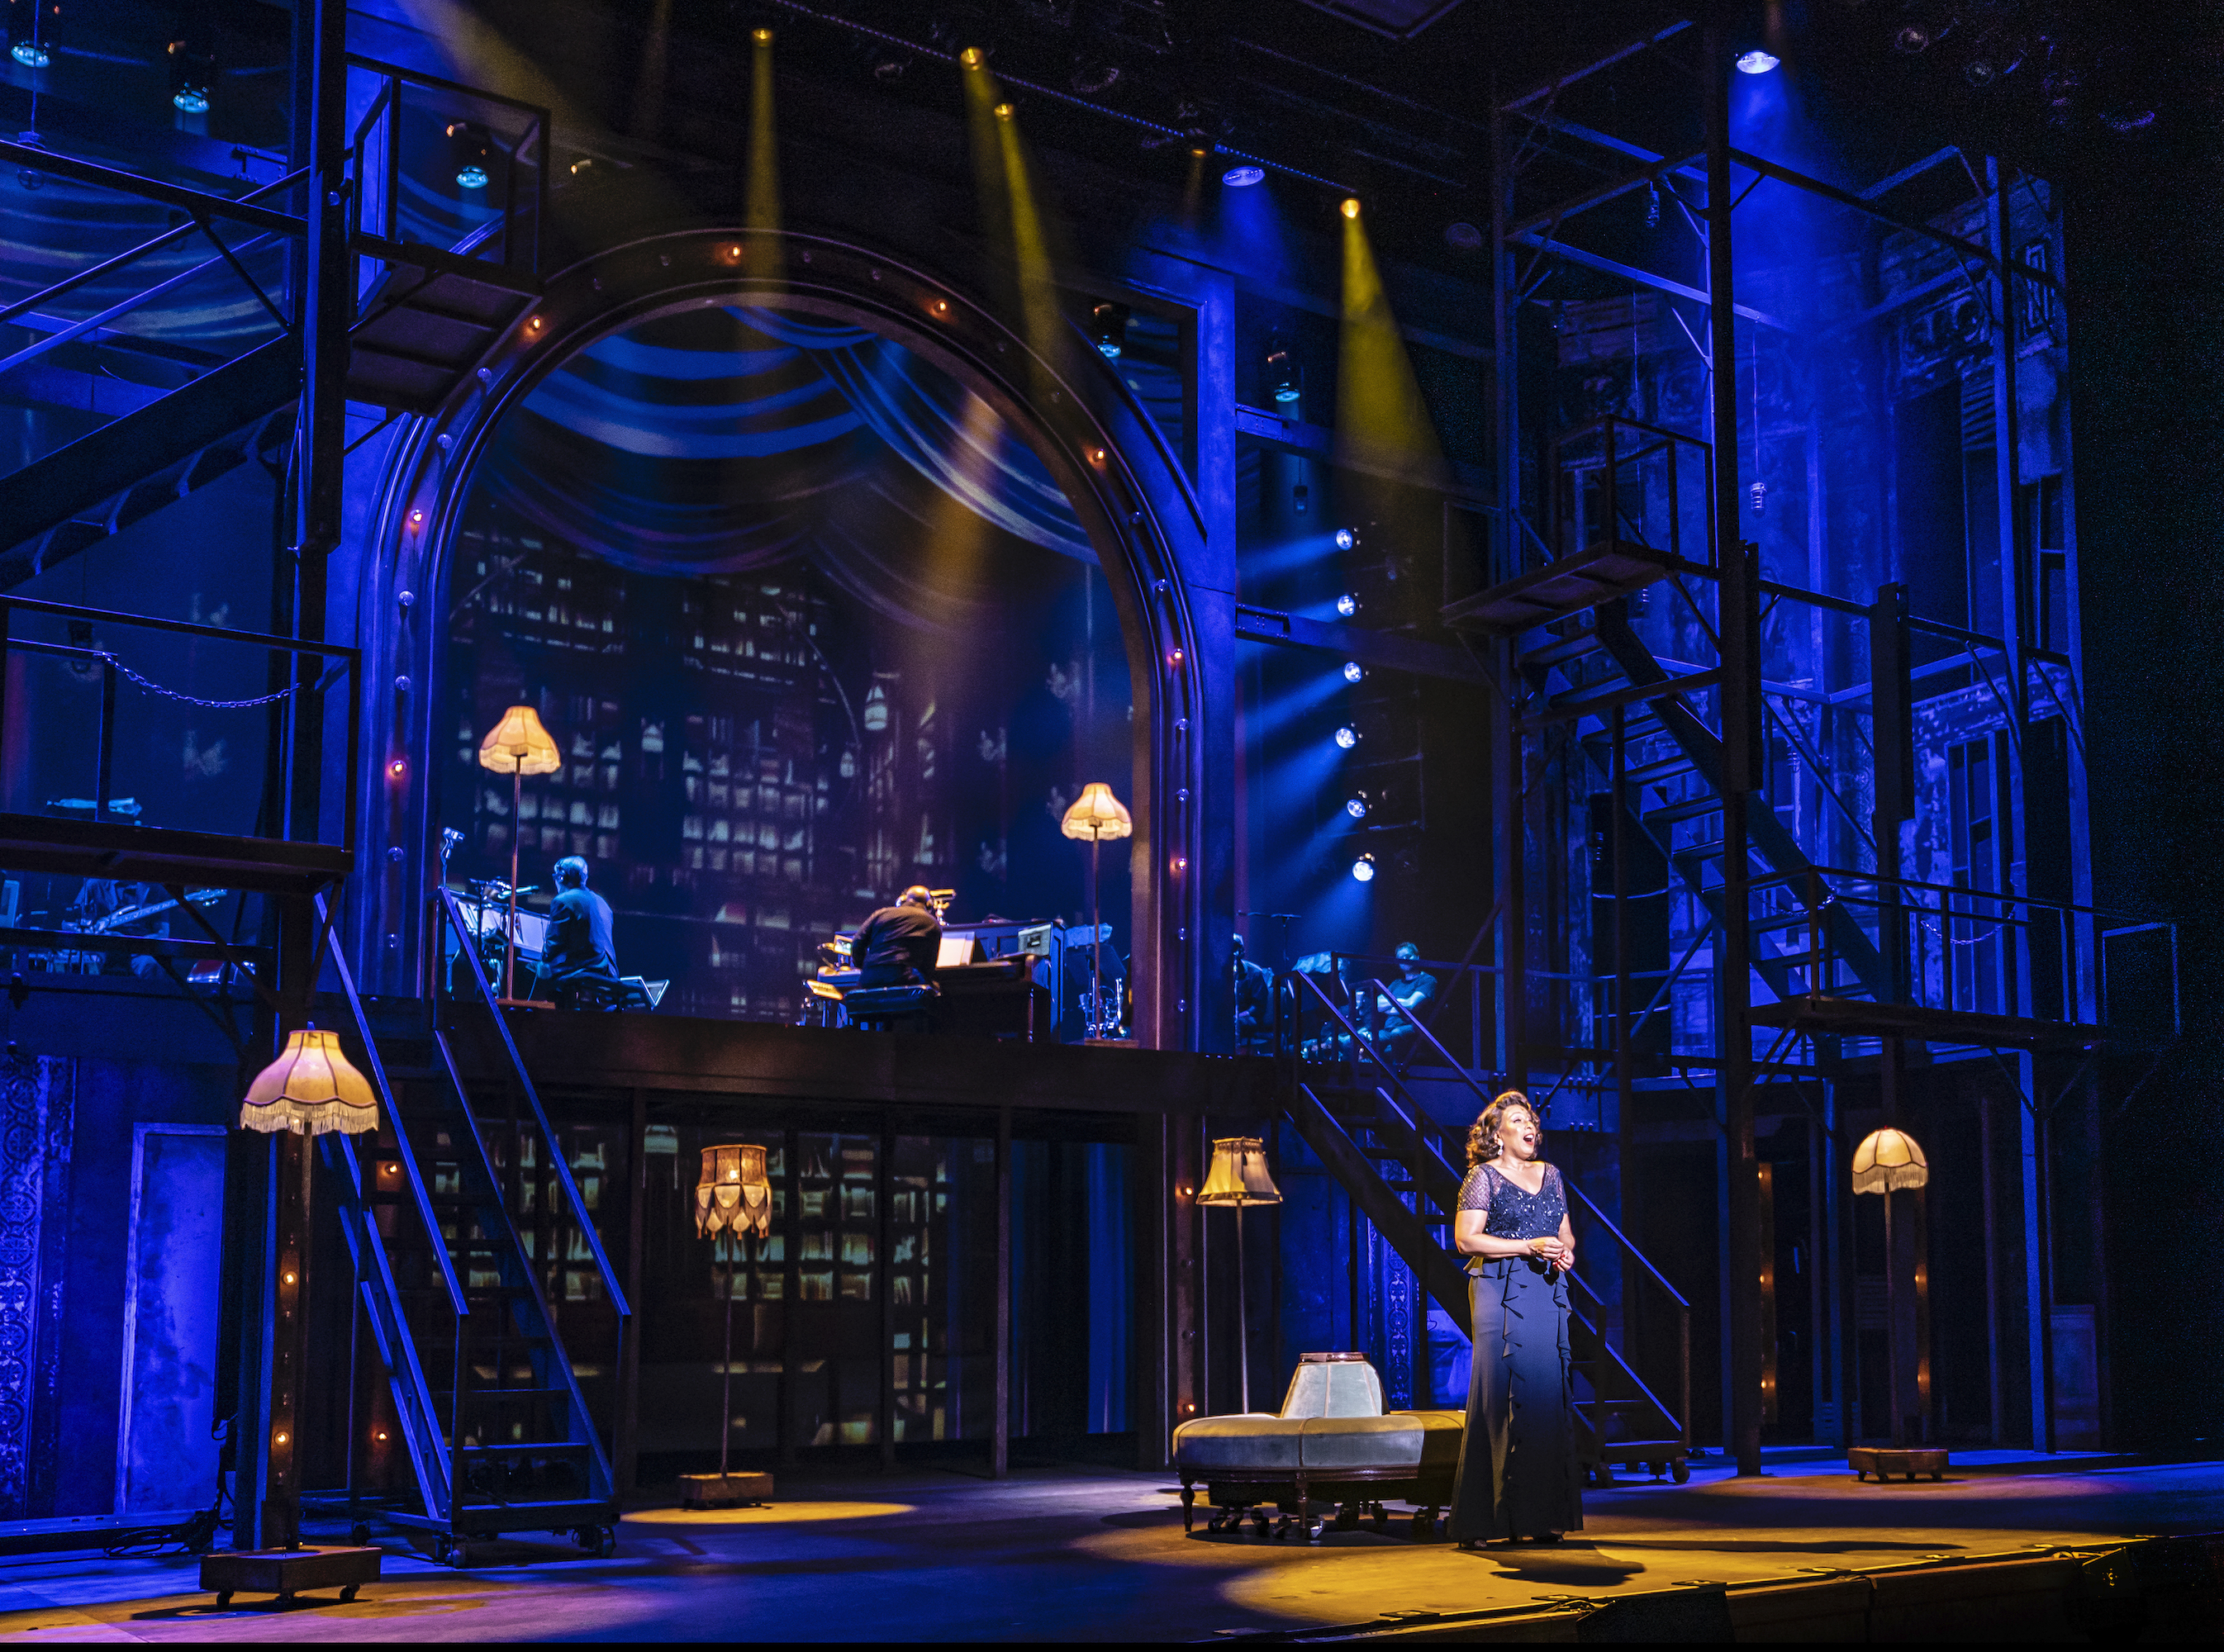 Photo 16 in '42nd STREET - Ordway' gallery showcasing lighting design by Mike Baldassari of Mike-O-Matic Industries LLC